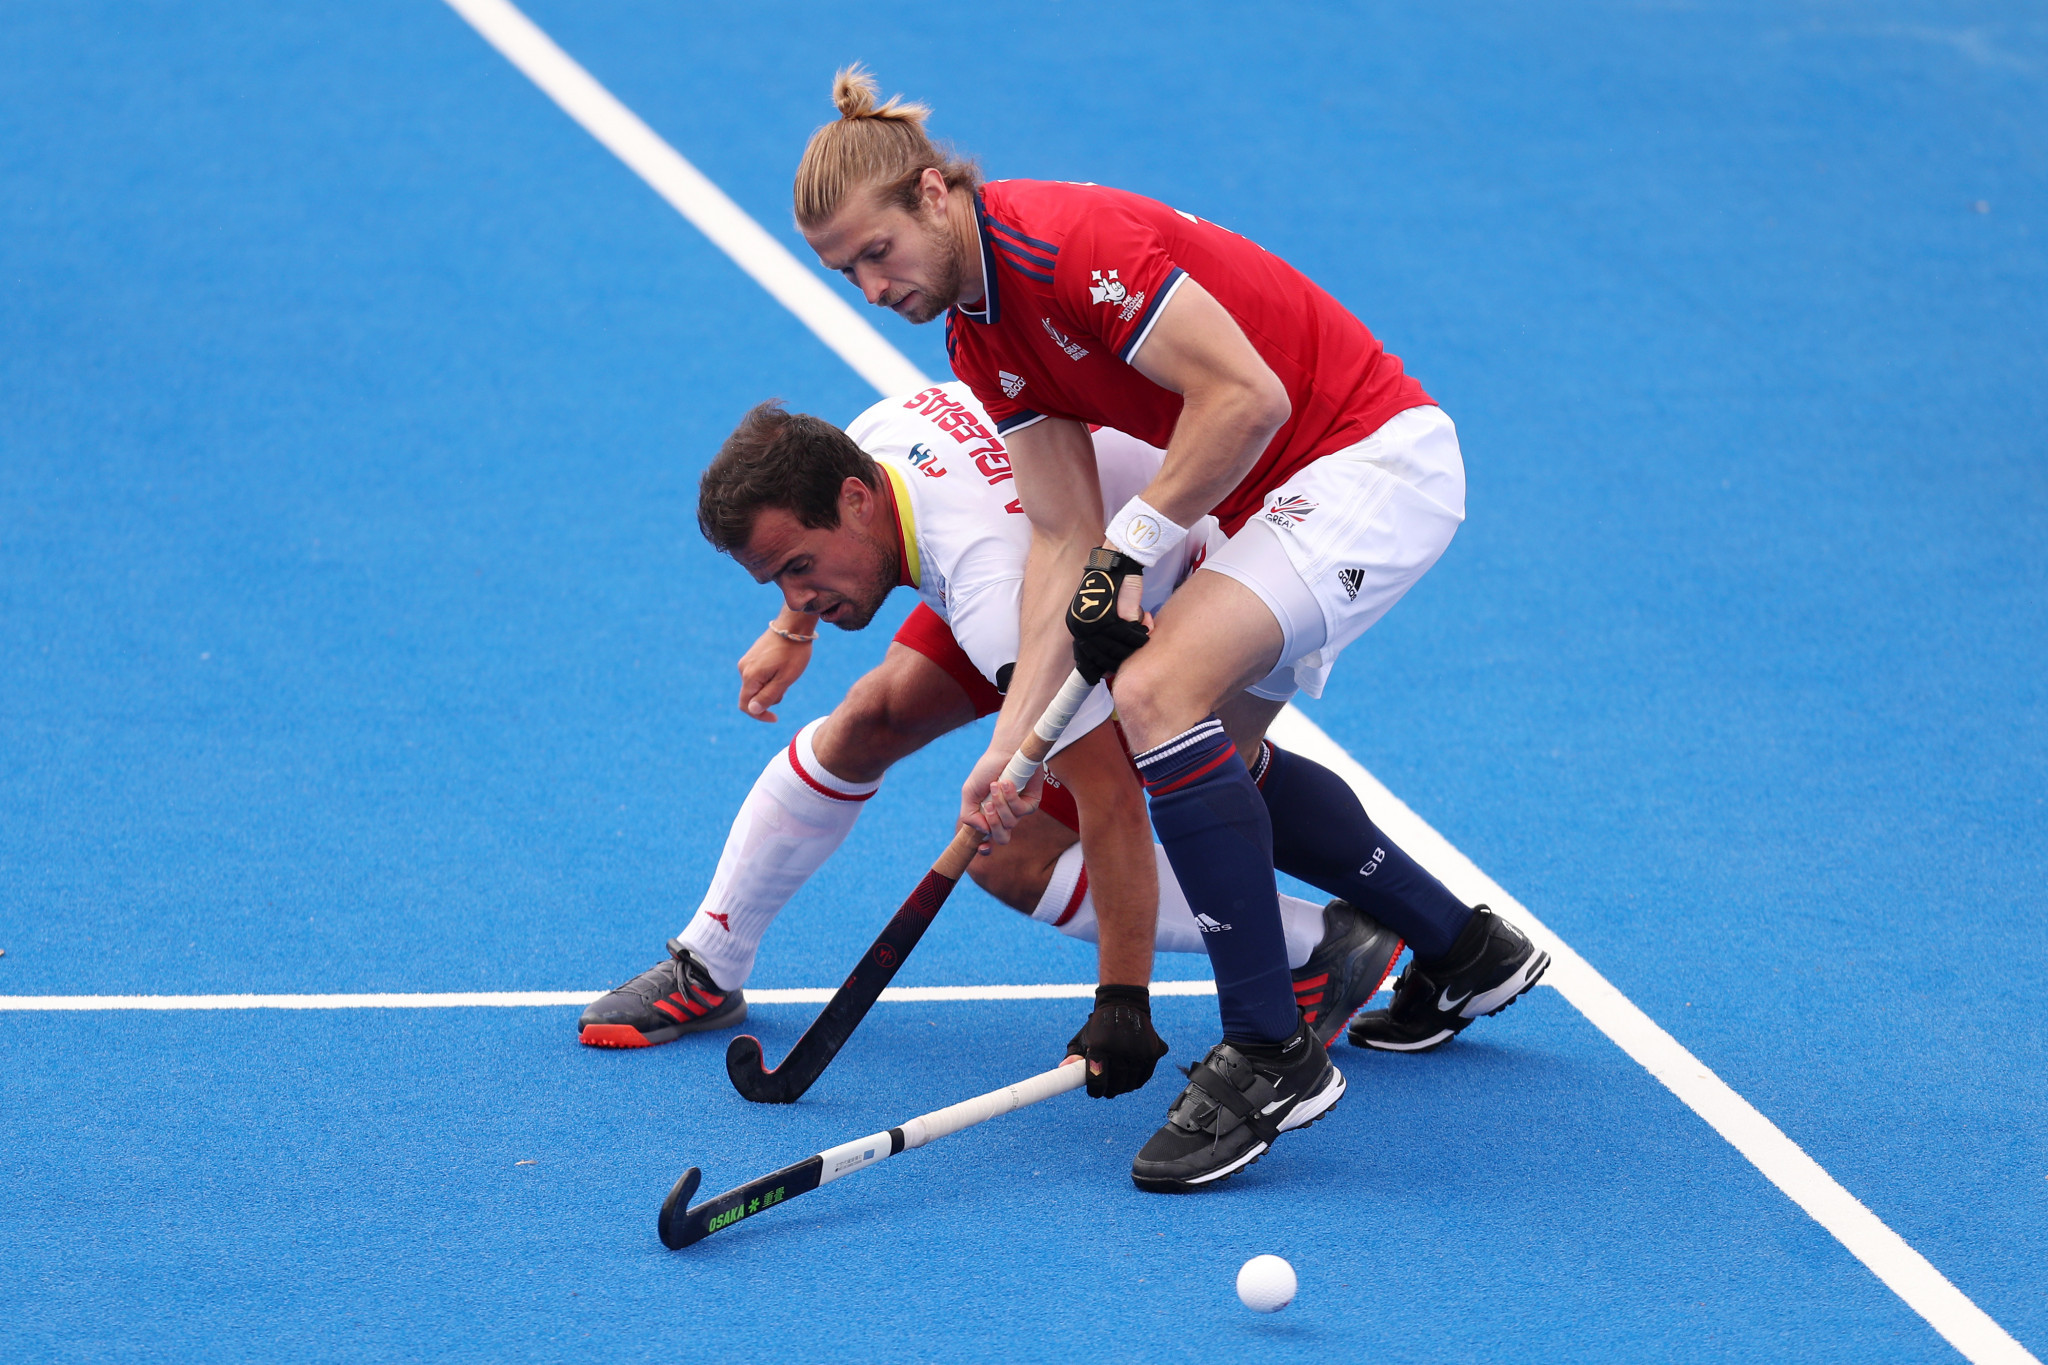 Spain beat Britain in a shootout in the FIH Pro League in London ©Getty Images